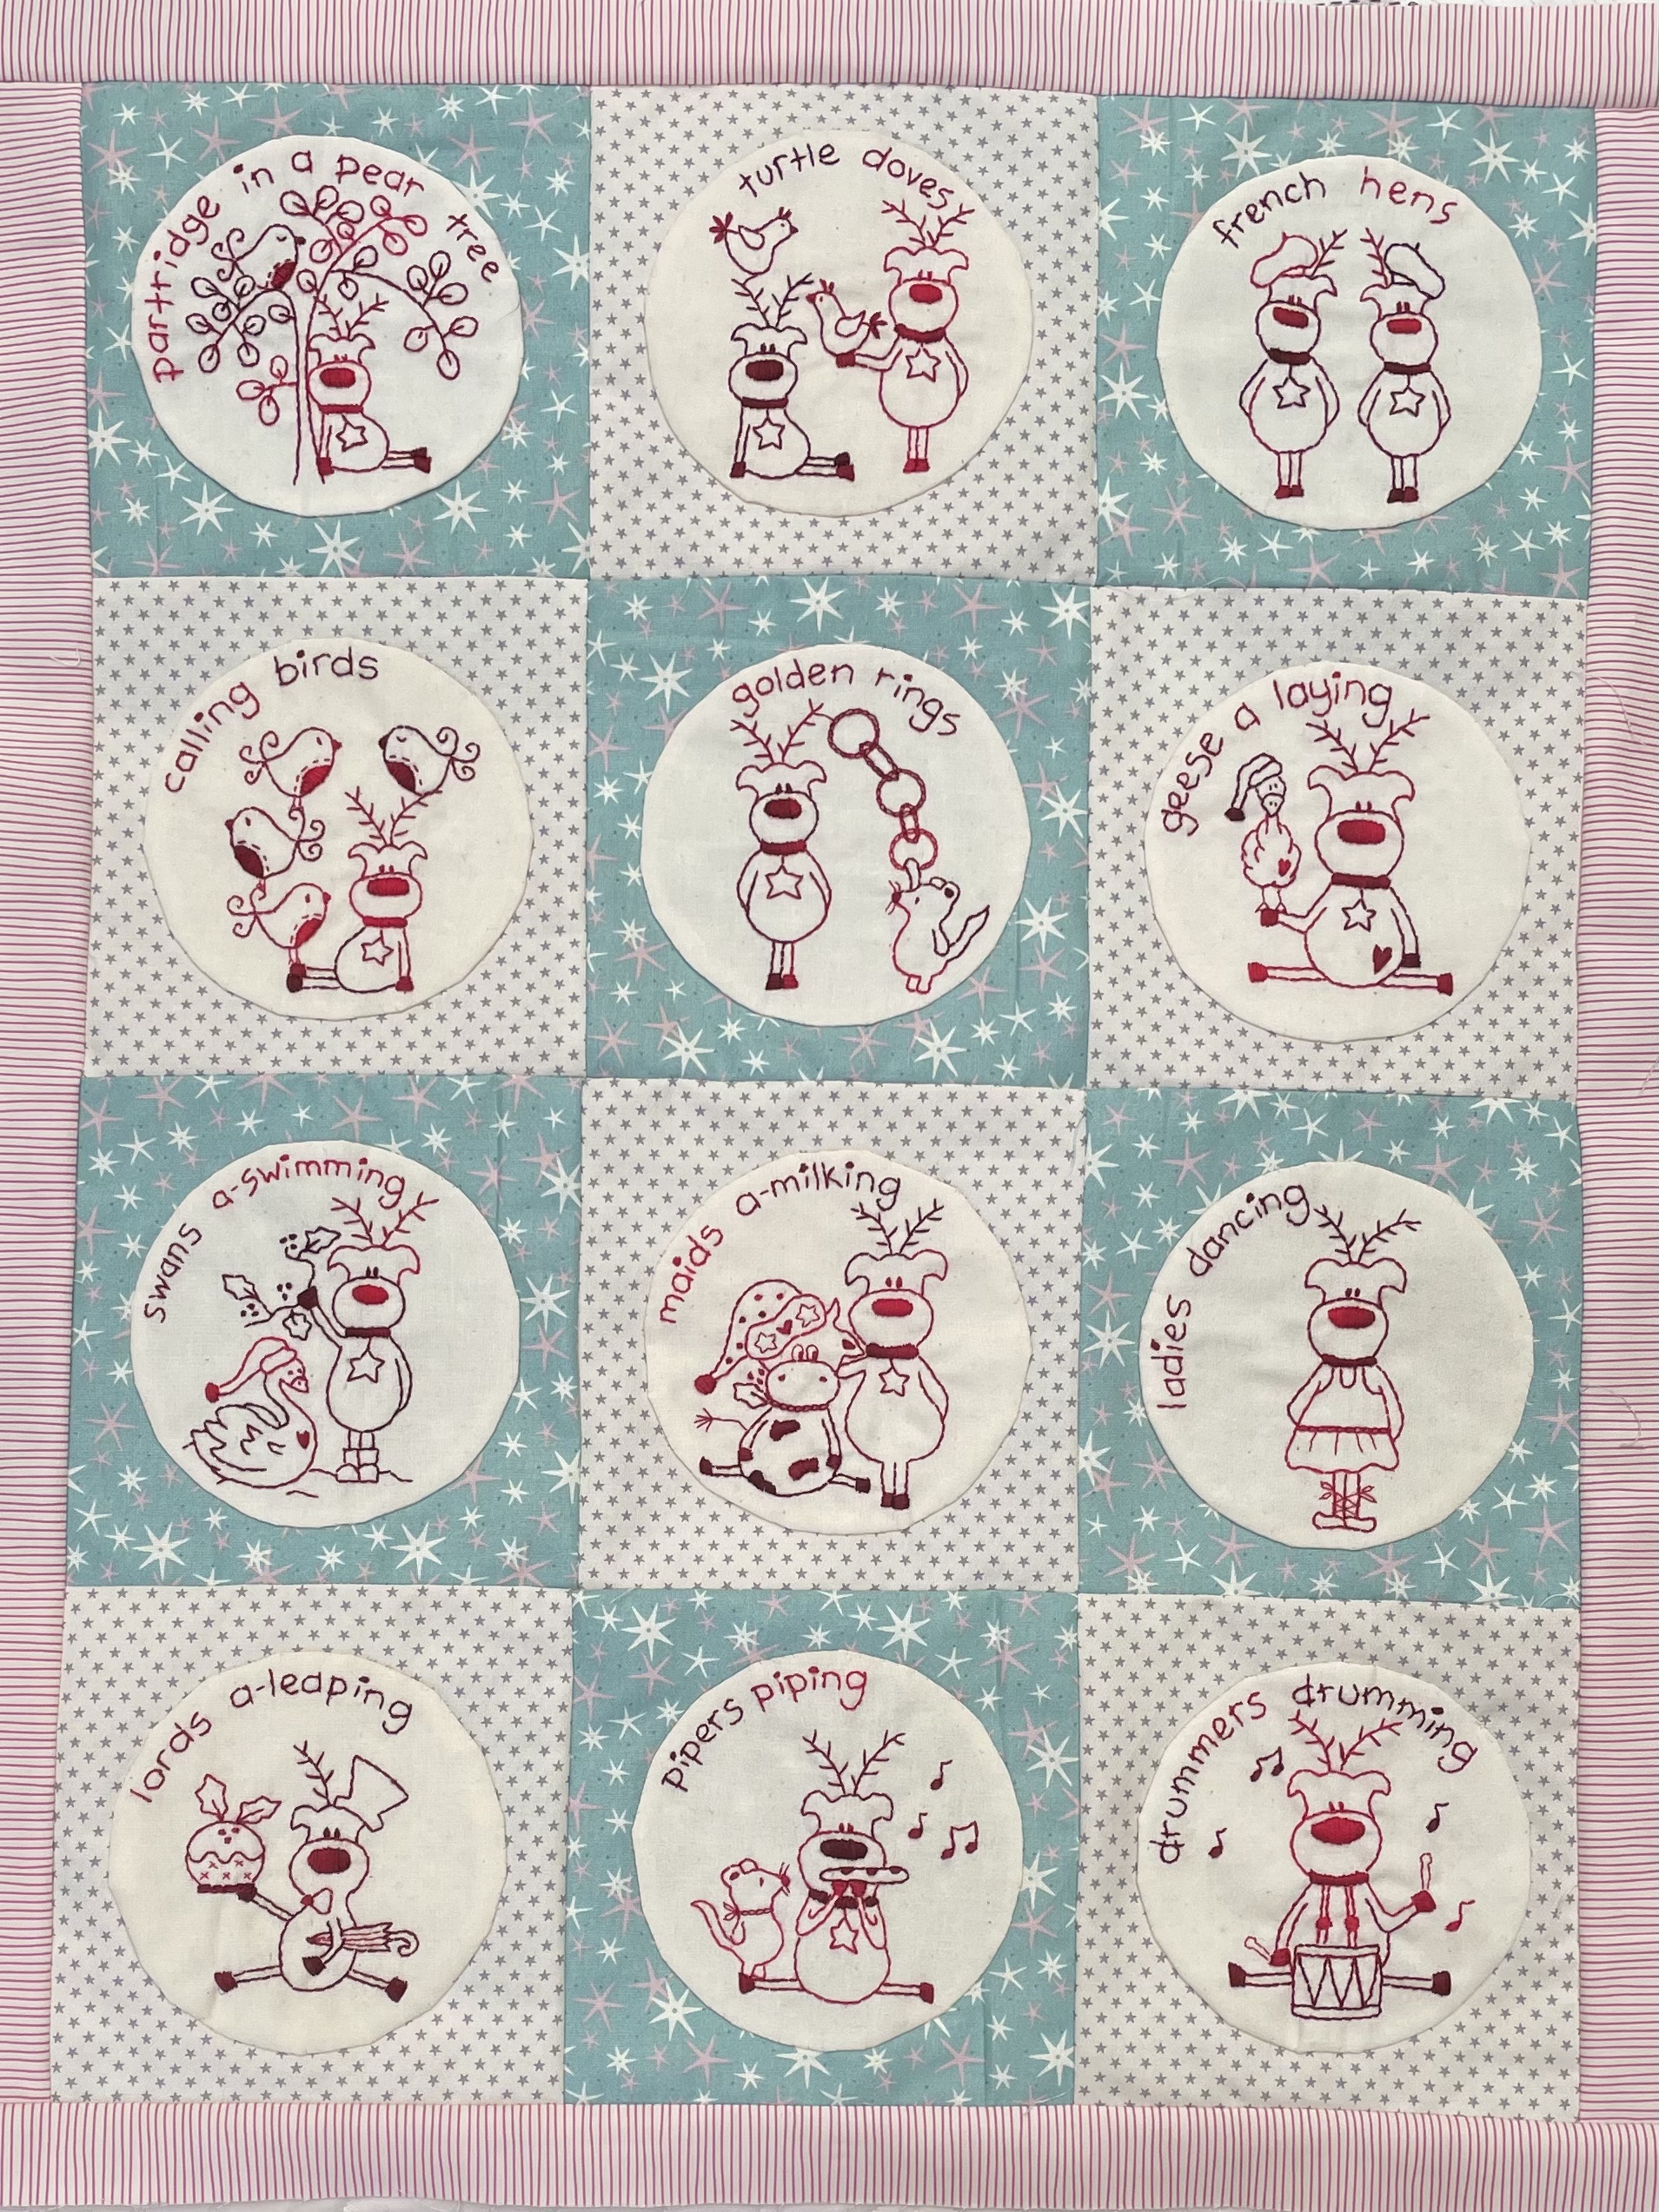 The Twelve Days of Rudolph pattern and kit